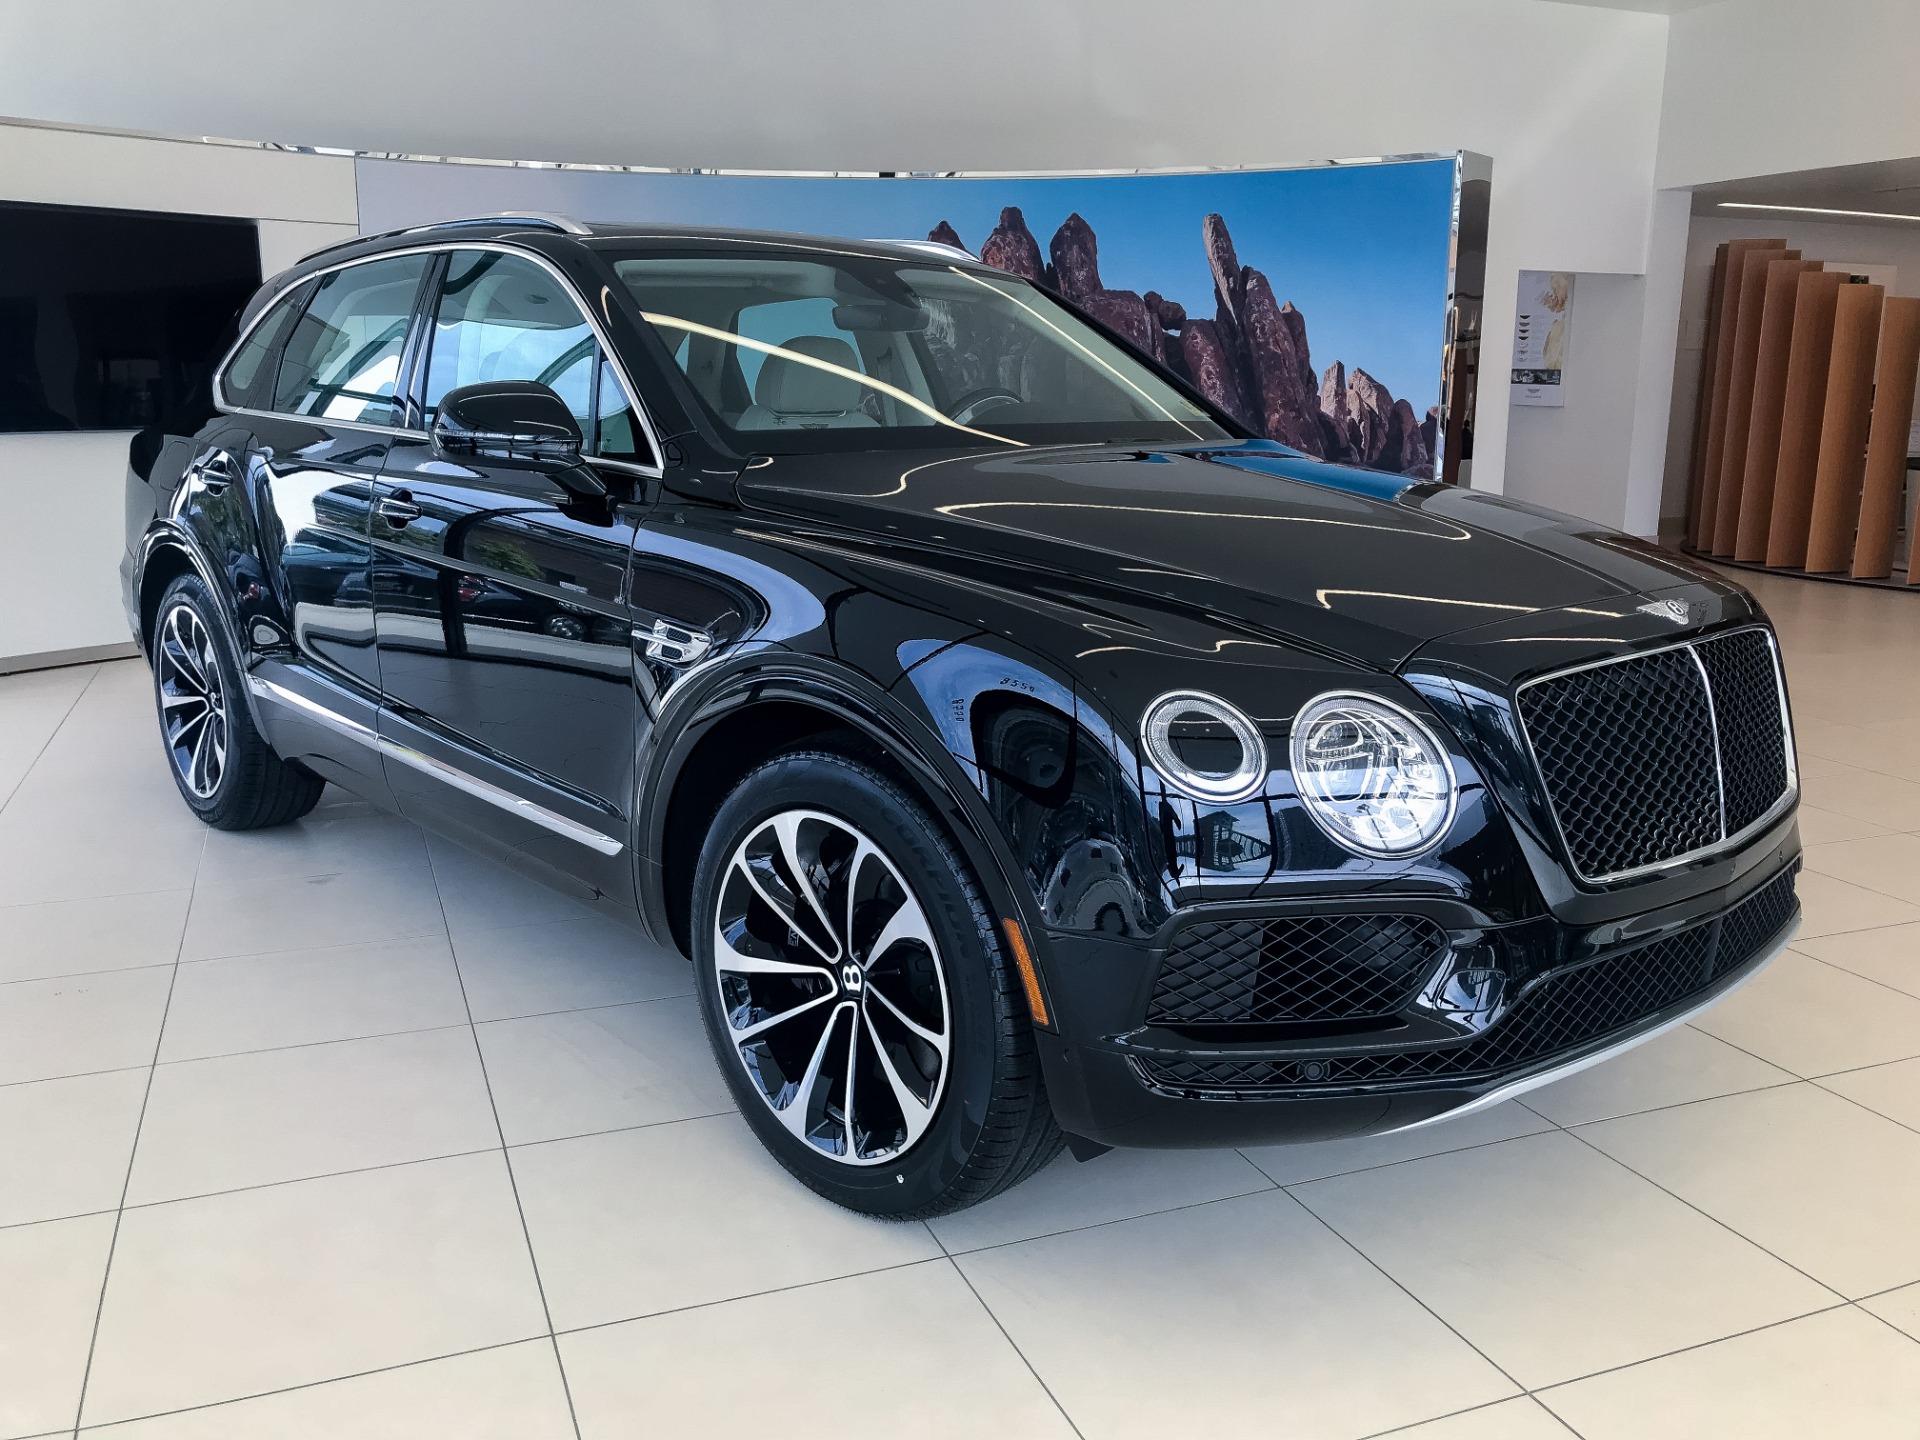 New 2019 Bentley BENTAYGA V8 For Sale (Sold) Exclusive Automotive Group  Stock #9N024517